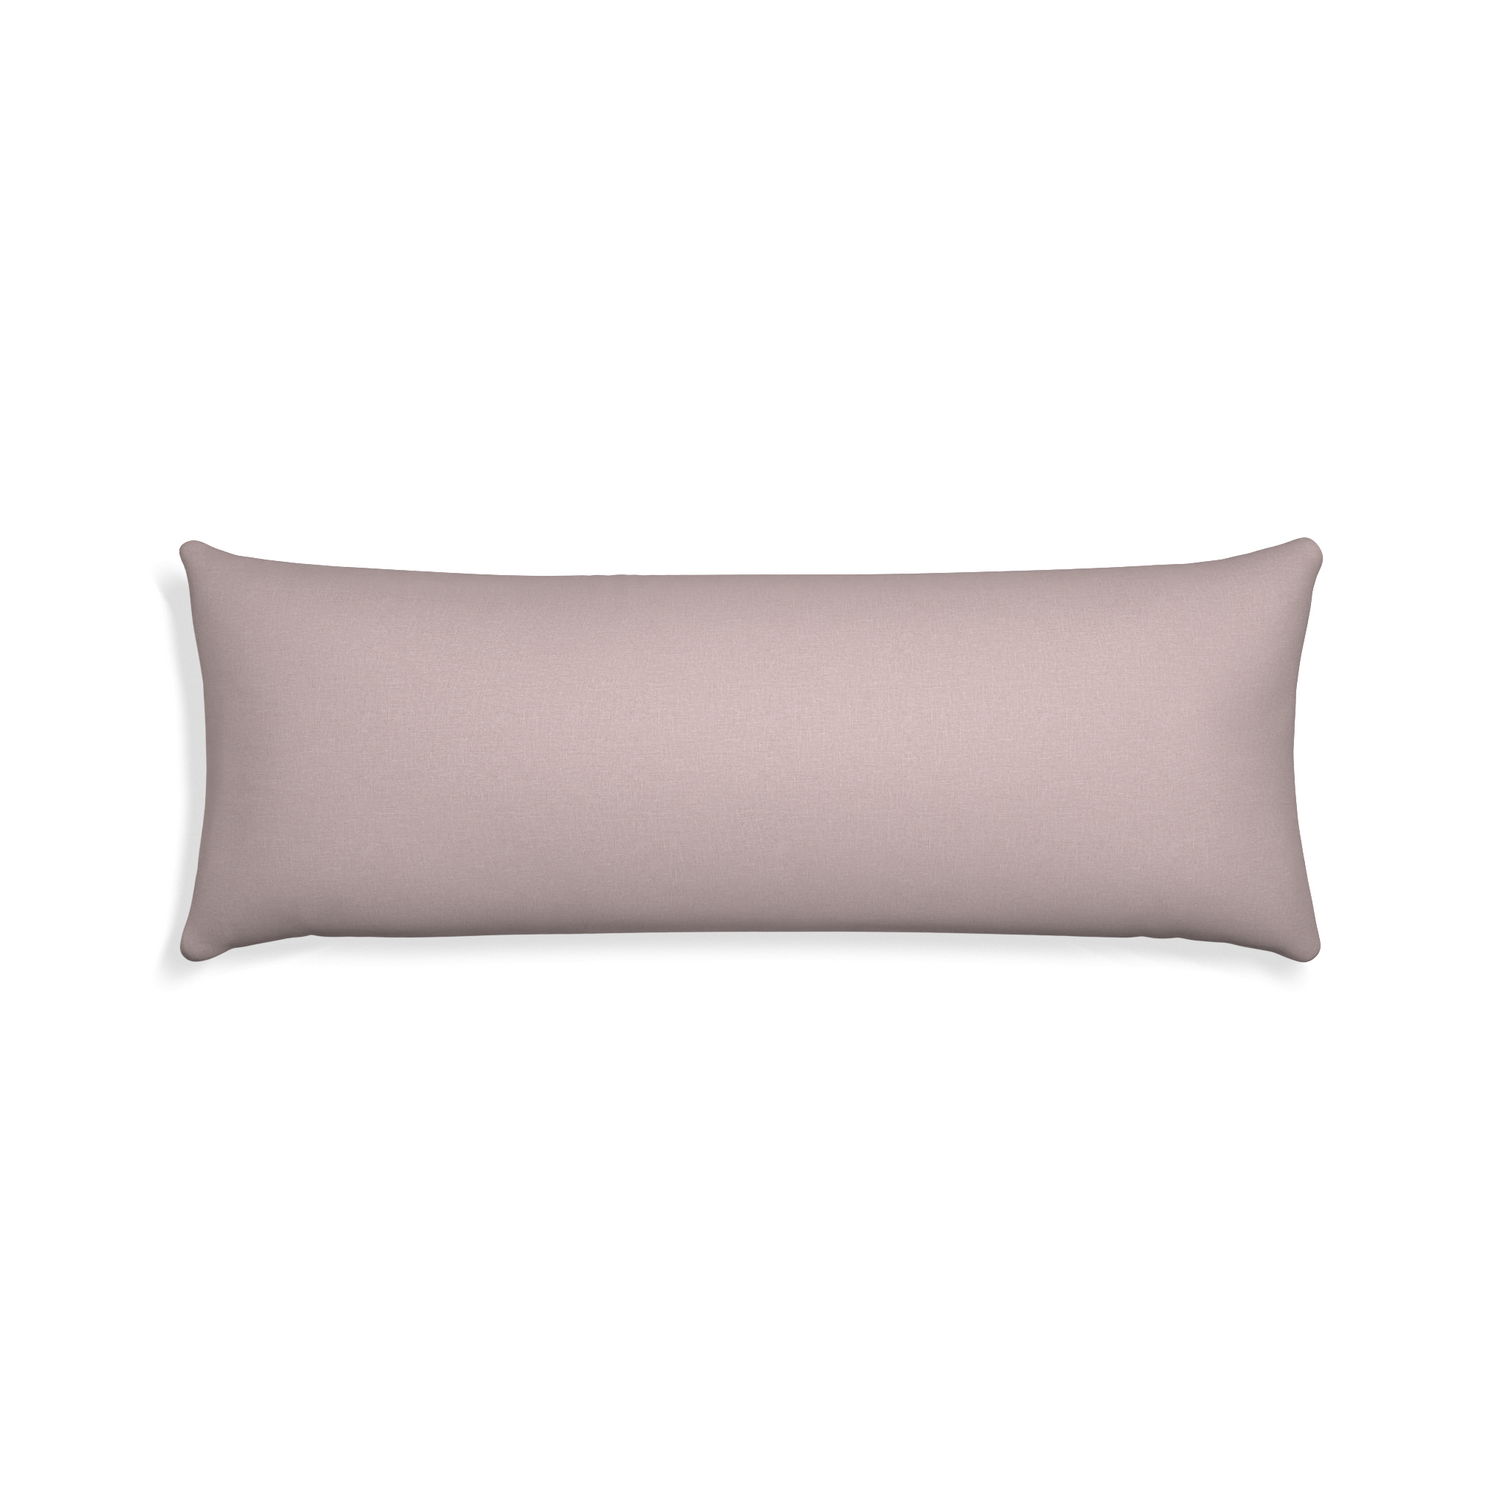 Xl-lumbar orchid custom mauve pinkpillow with none on white background